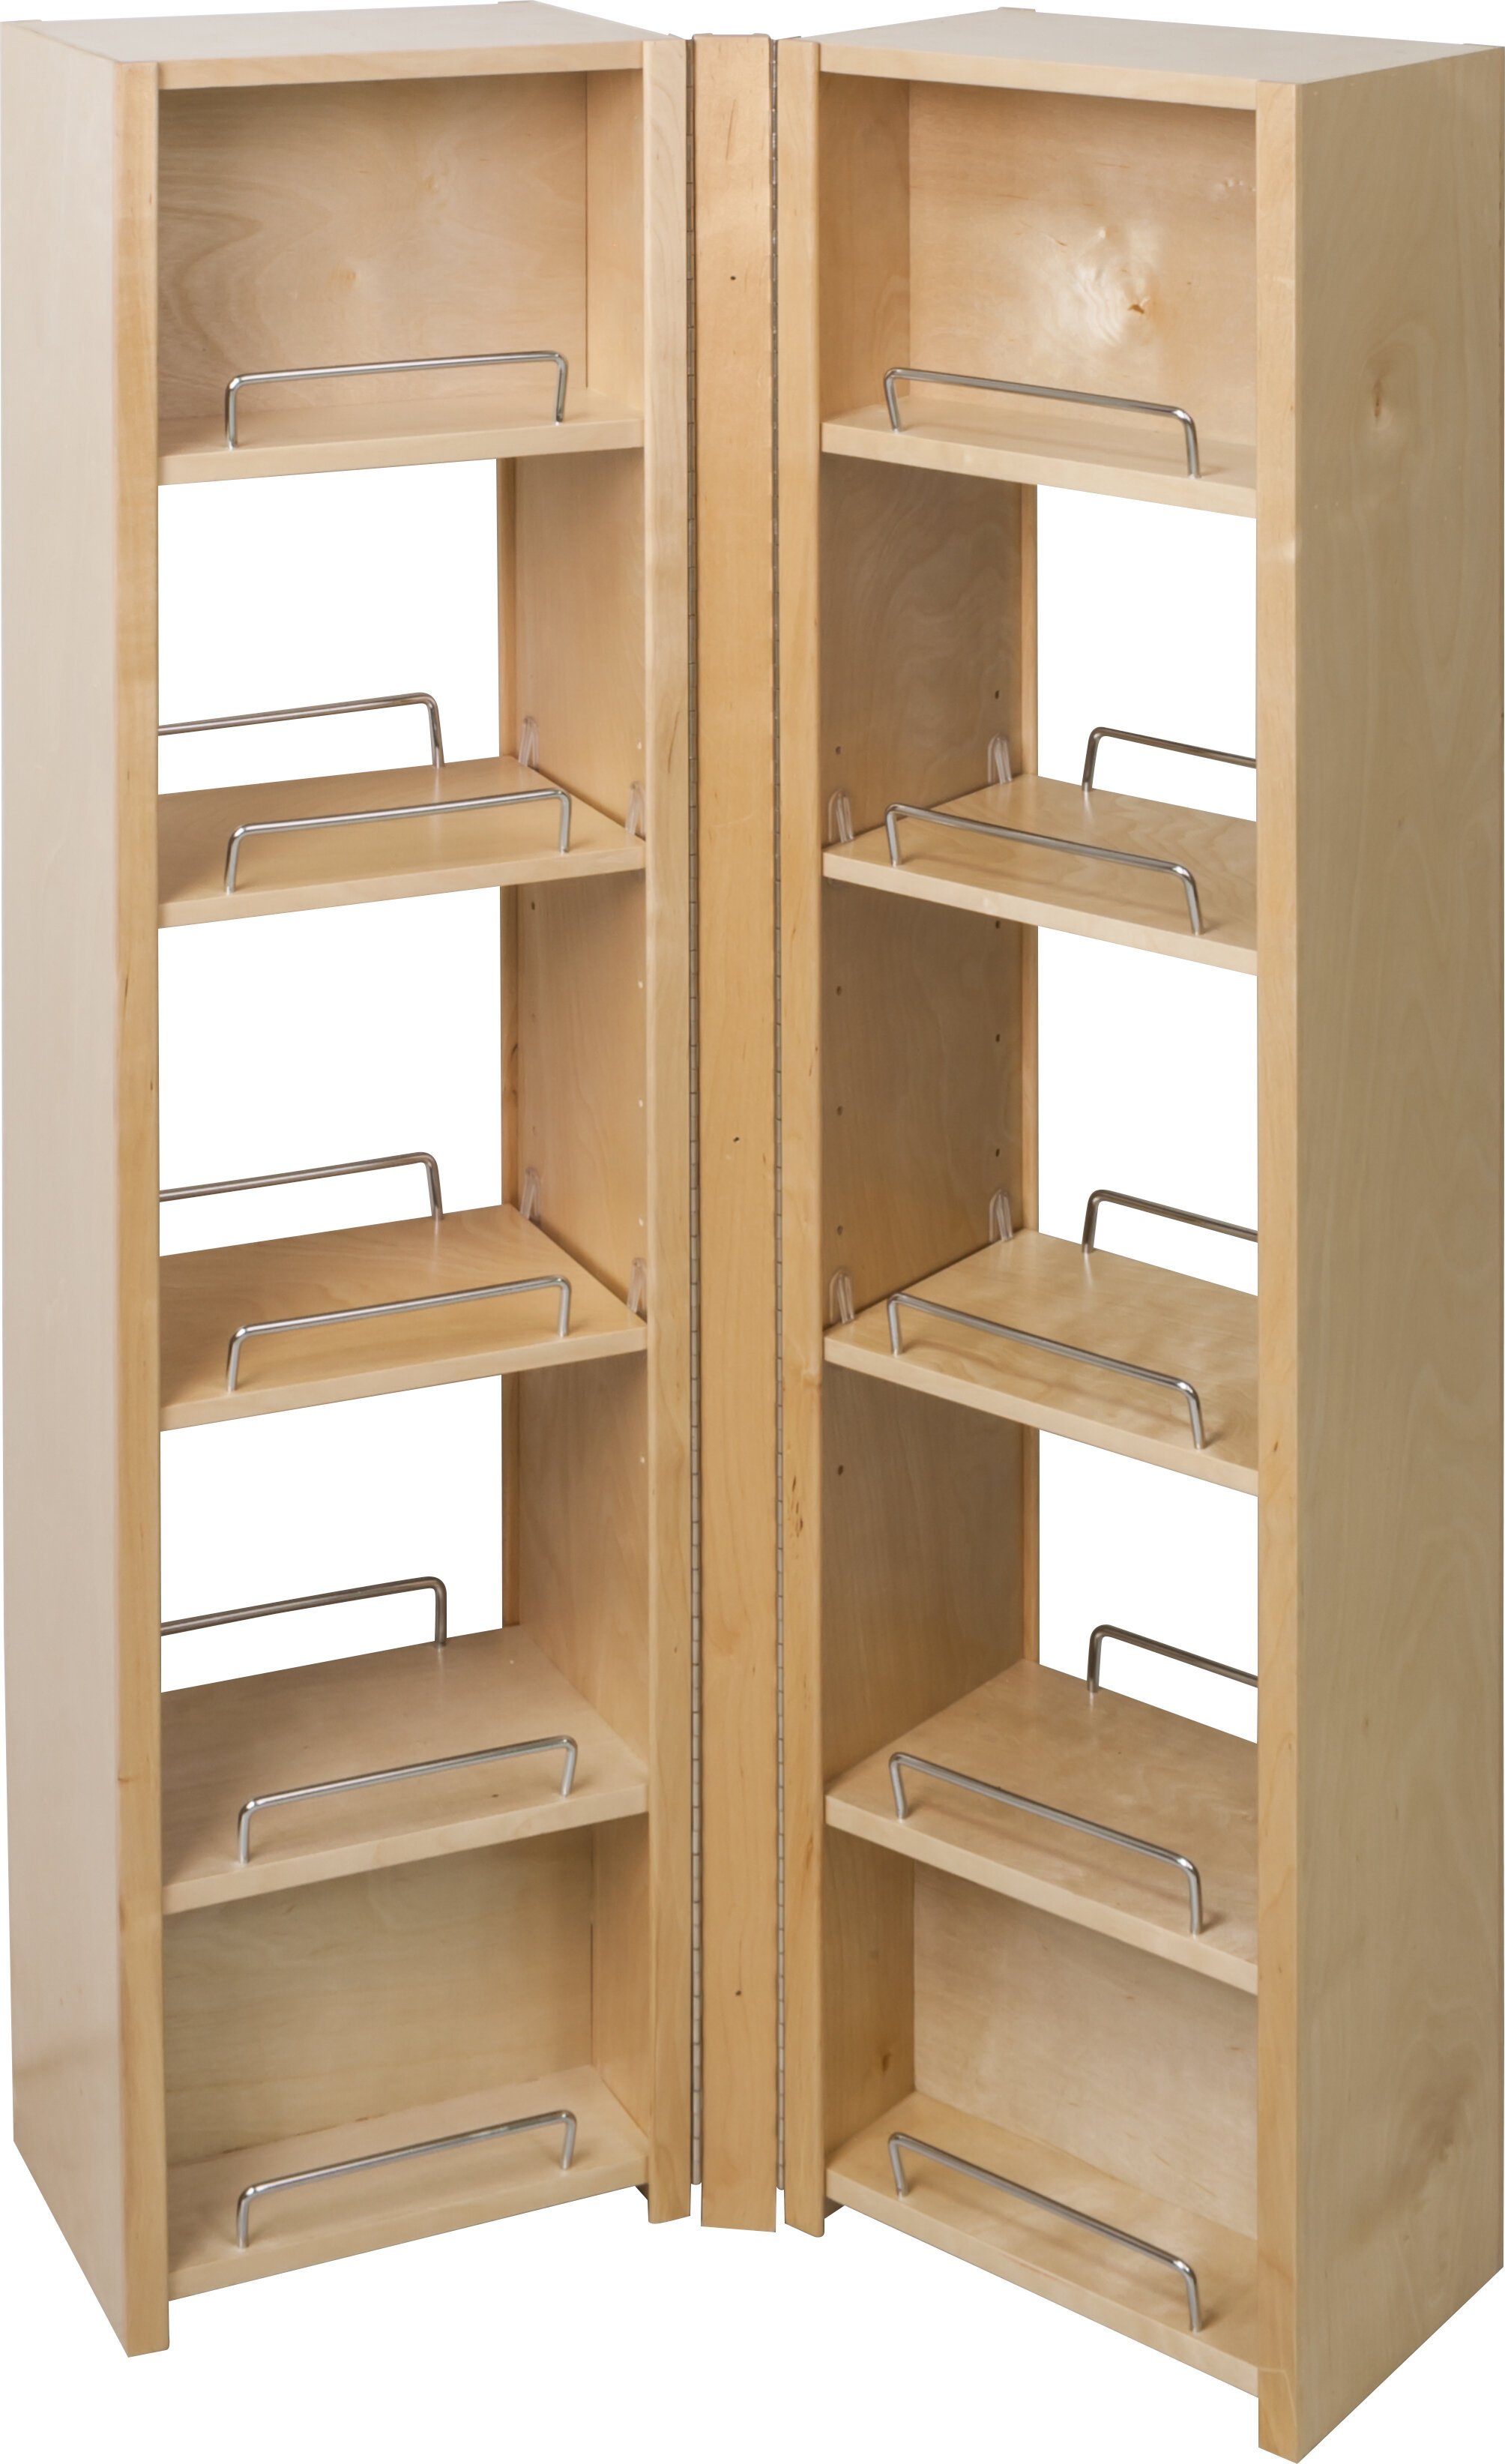 Solid-Bottom Pull-Out Pantry Unit